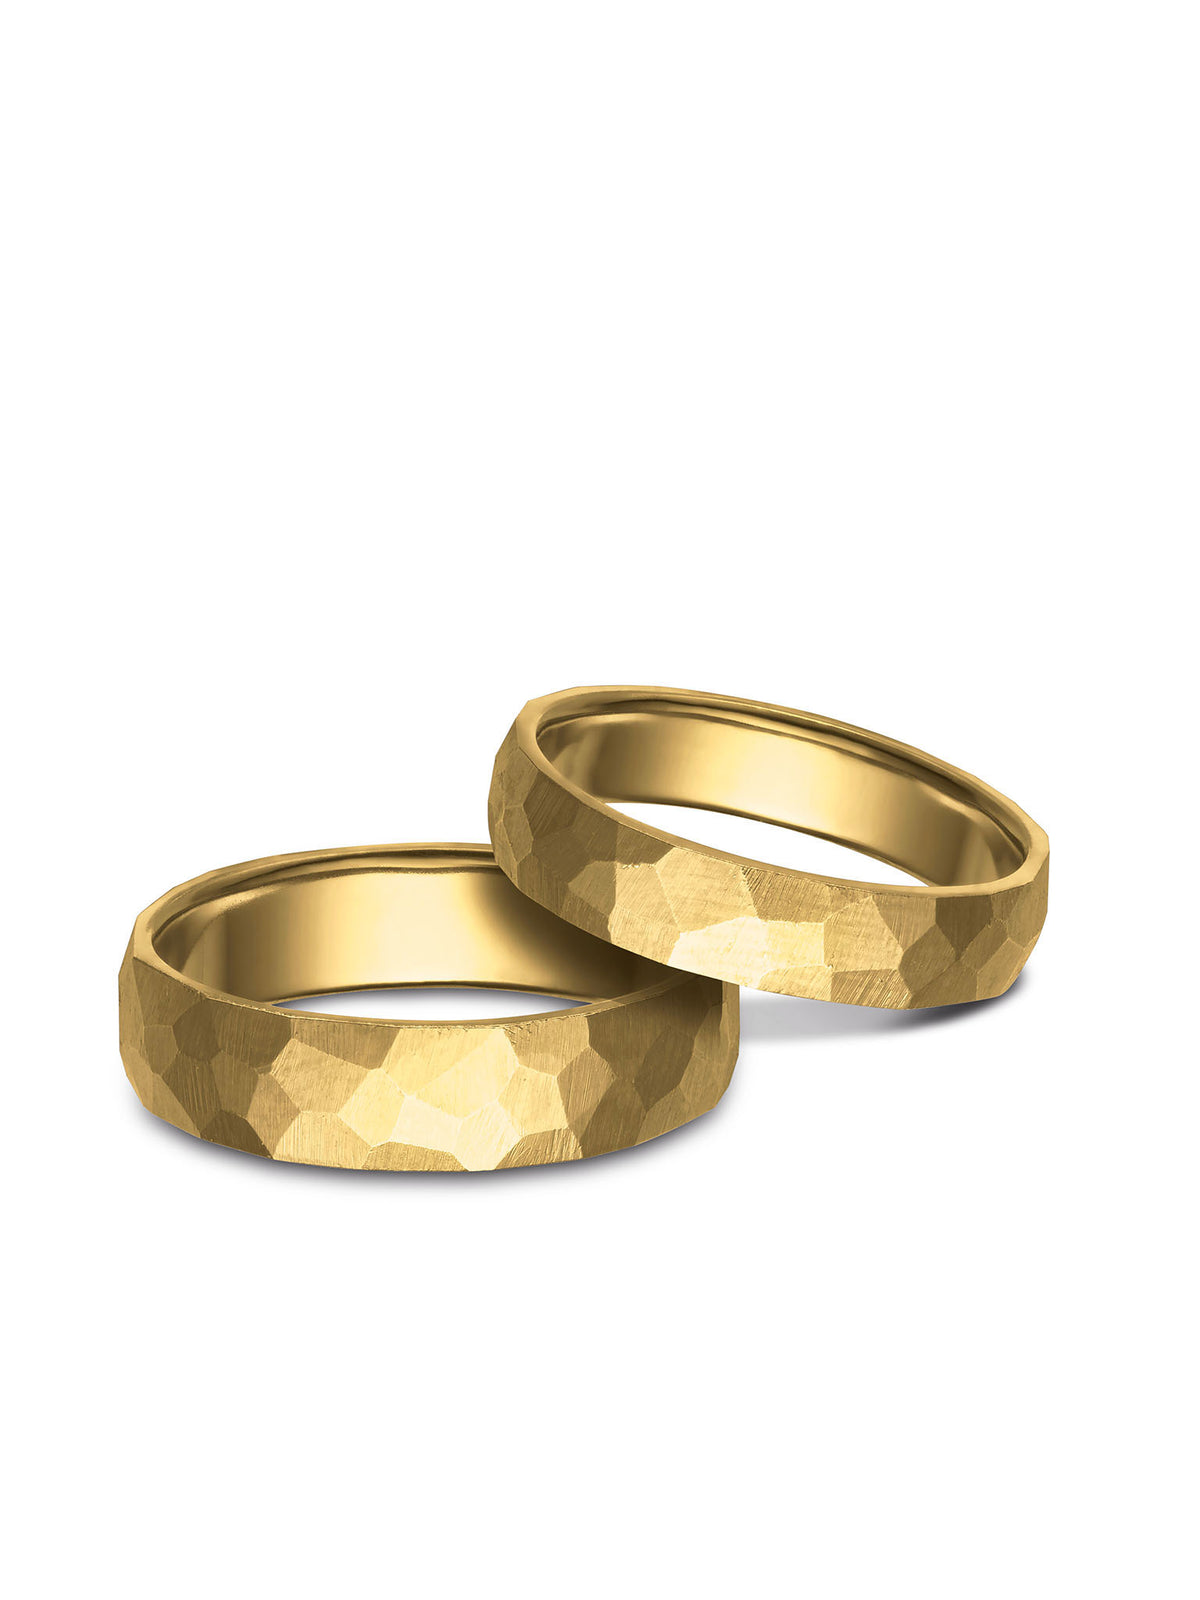 Faceted Wedding Band / Gold